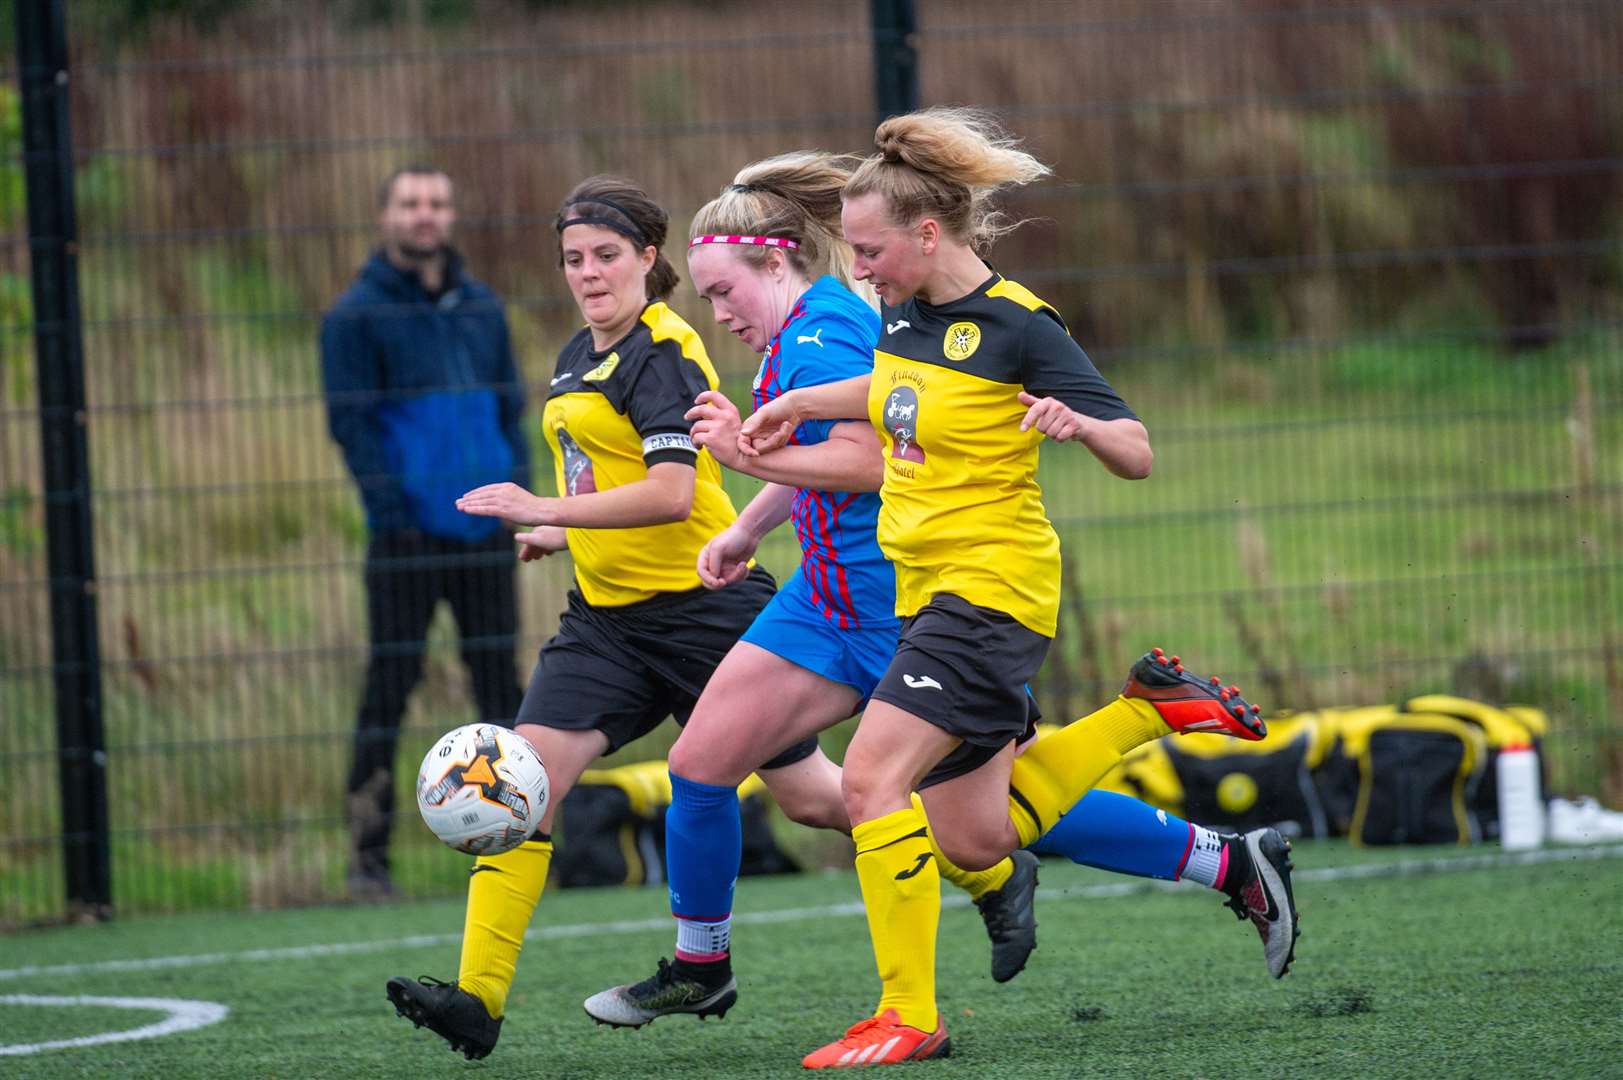 Inverness Caledonian Thistle Women v Stonehaven, Inverness Royal Academy...Kayleigh Mackenzie gave Stonehaven real problems...Picture: Callum Mackay..